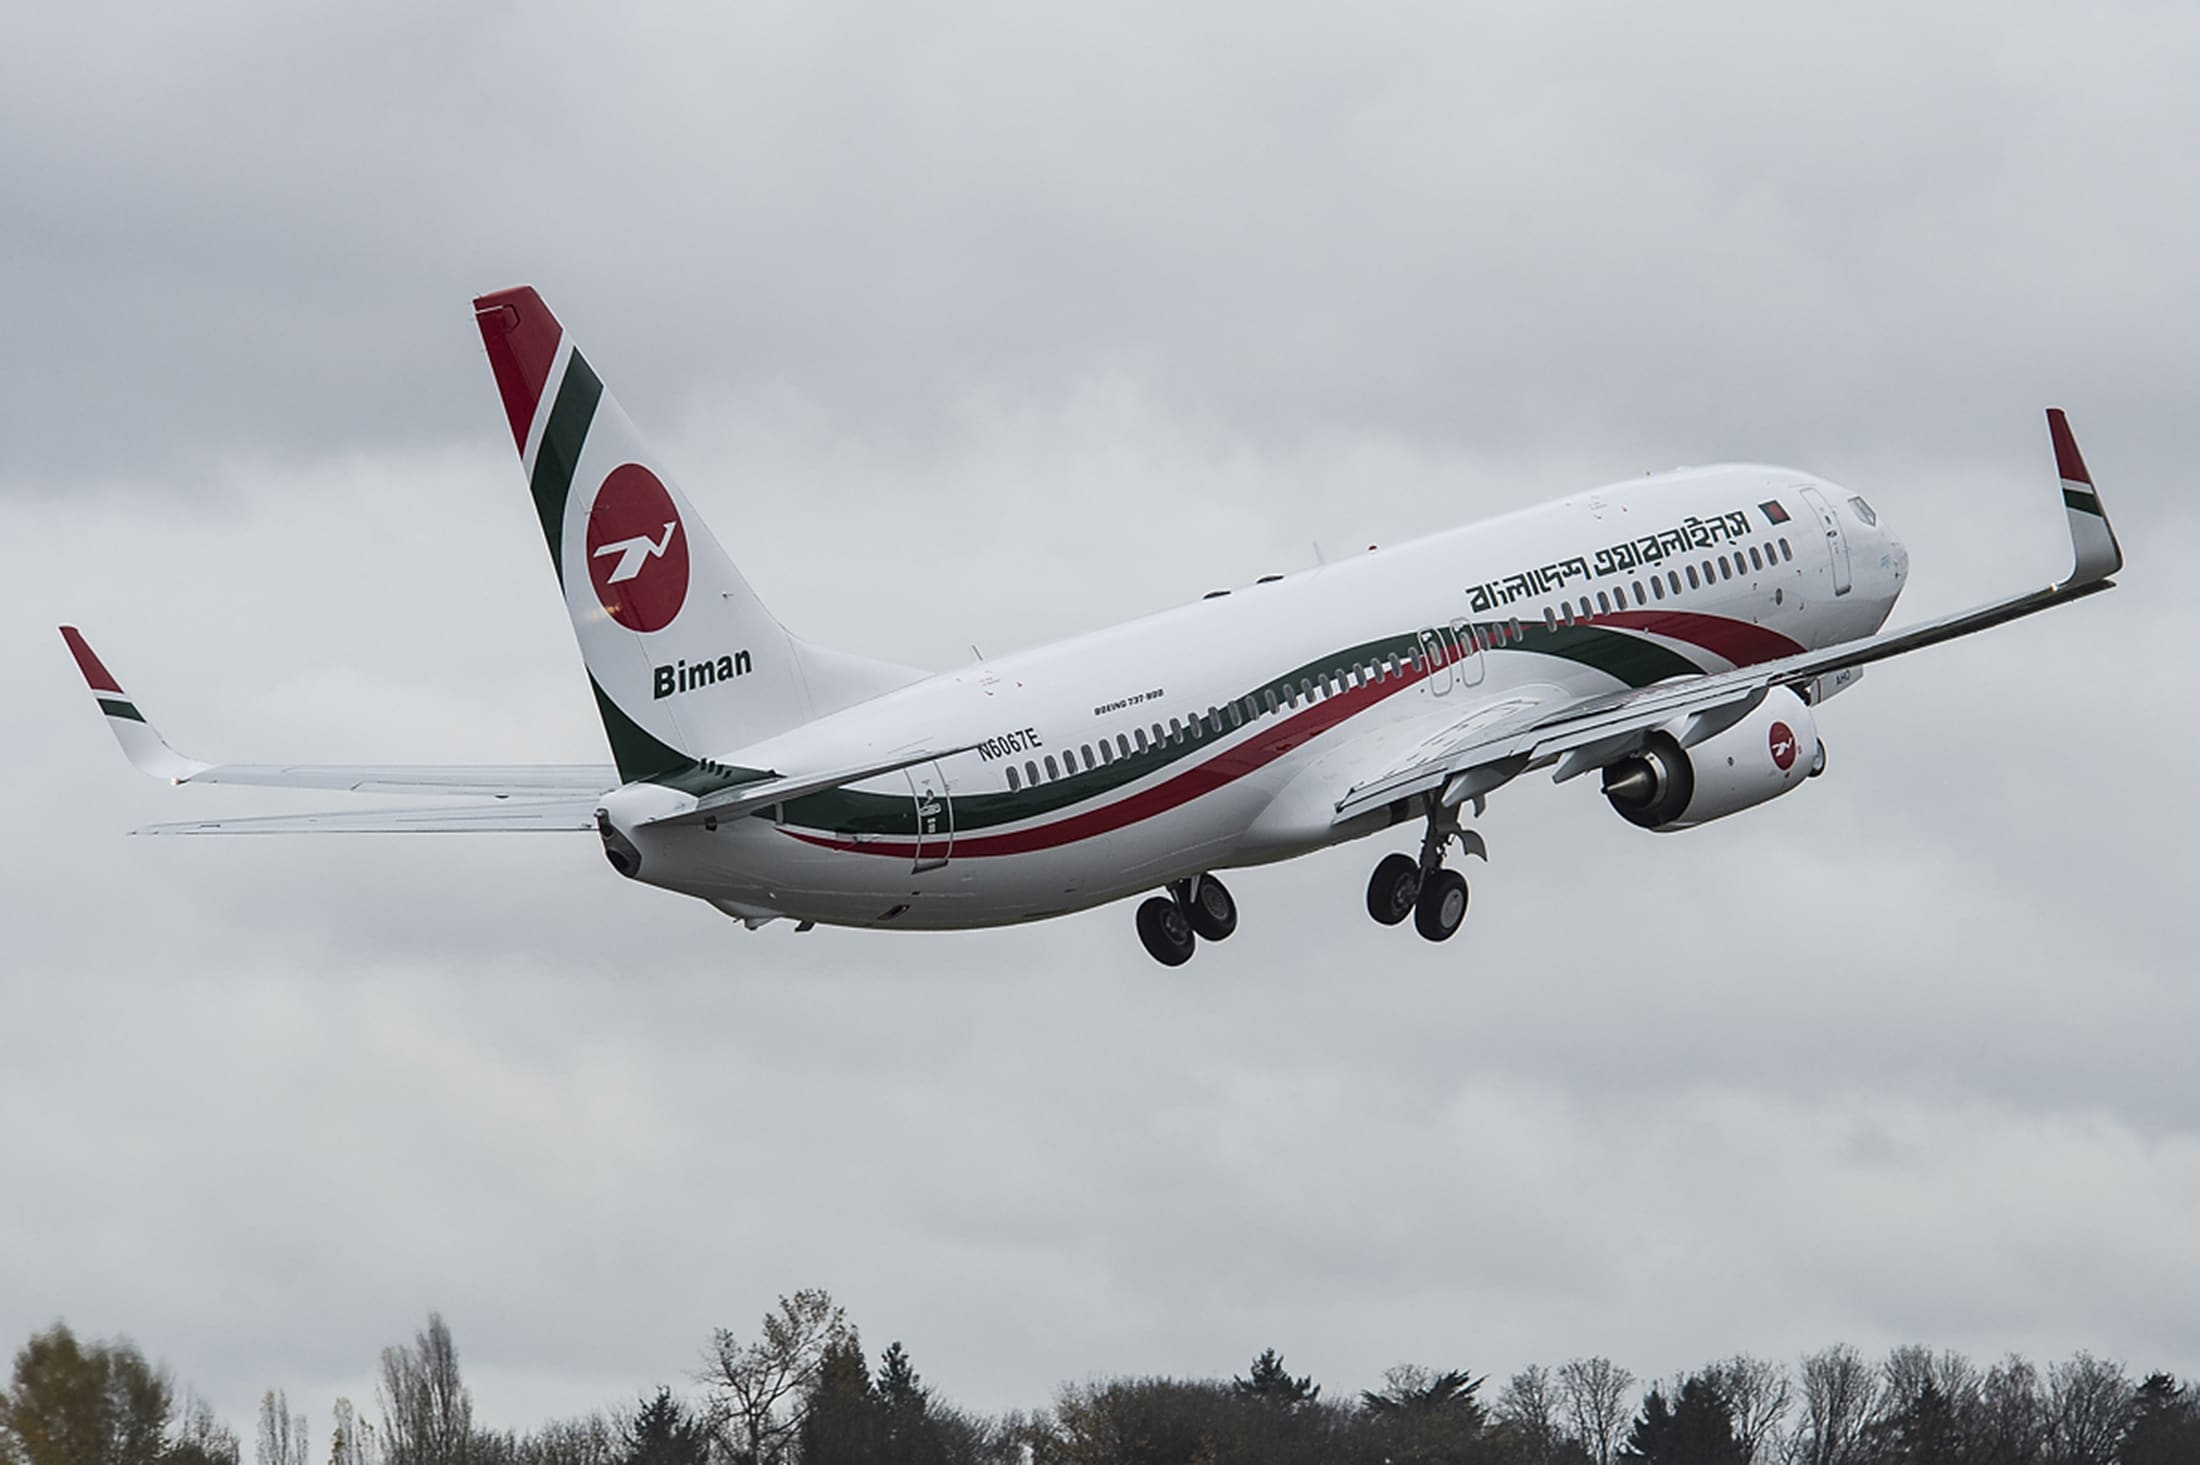 2015-11-18 Biman Bangladesh Airlines YT826 5664 (BNG); 737-800; Seattle Delivery Center; Boeing Field; Take Off; K66466-1